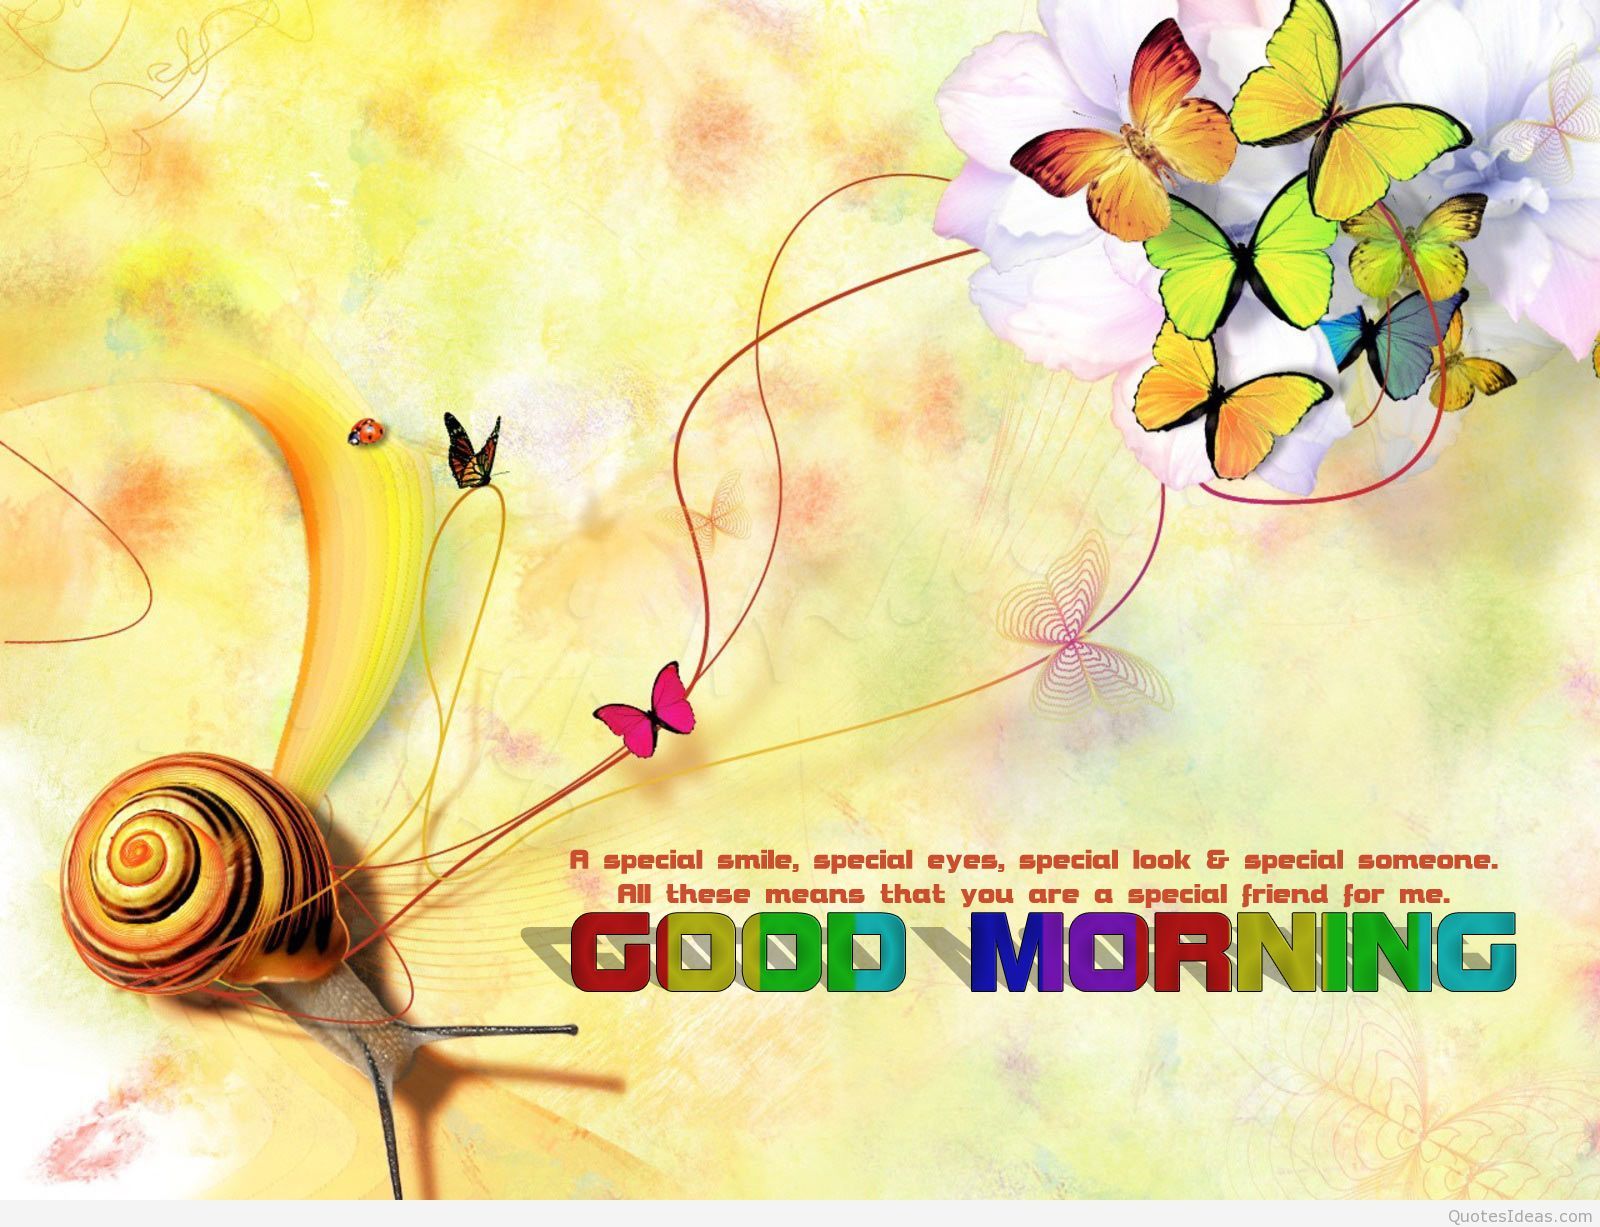 Good morning messages, wallpaper, quotes cards & pics